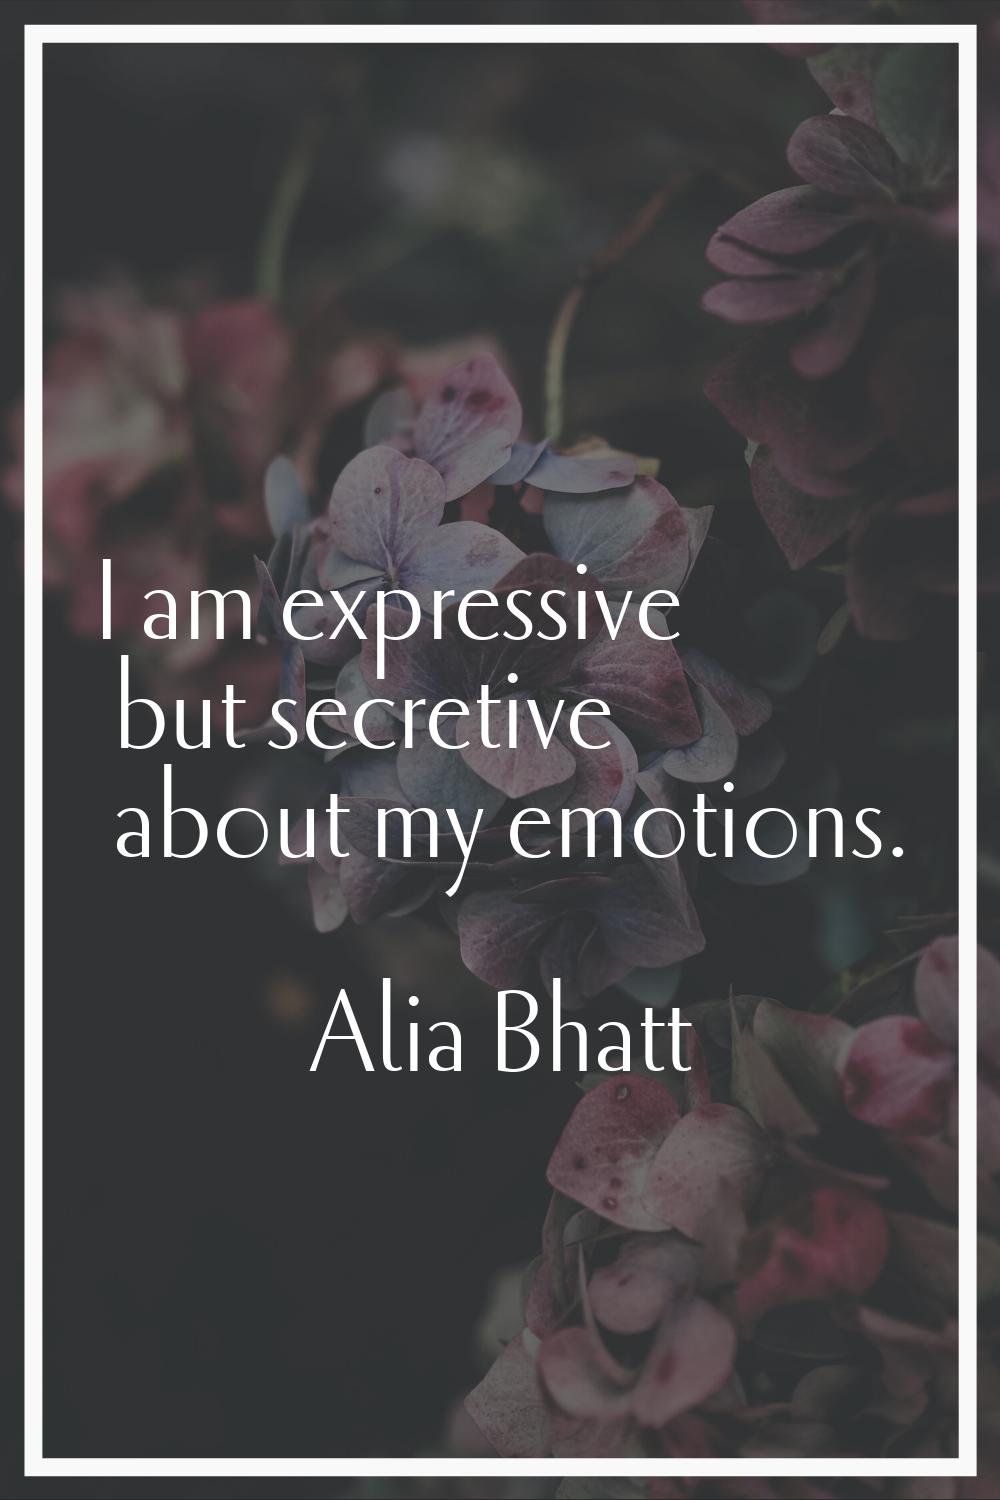 I am expressive but secretive about my emotions.